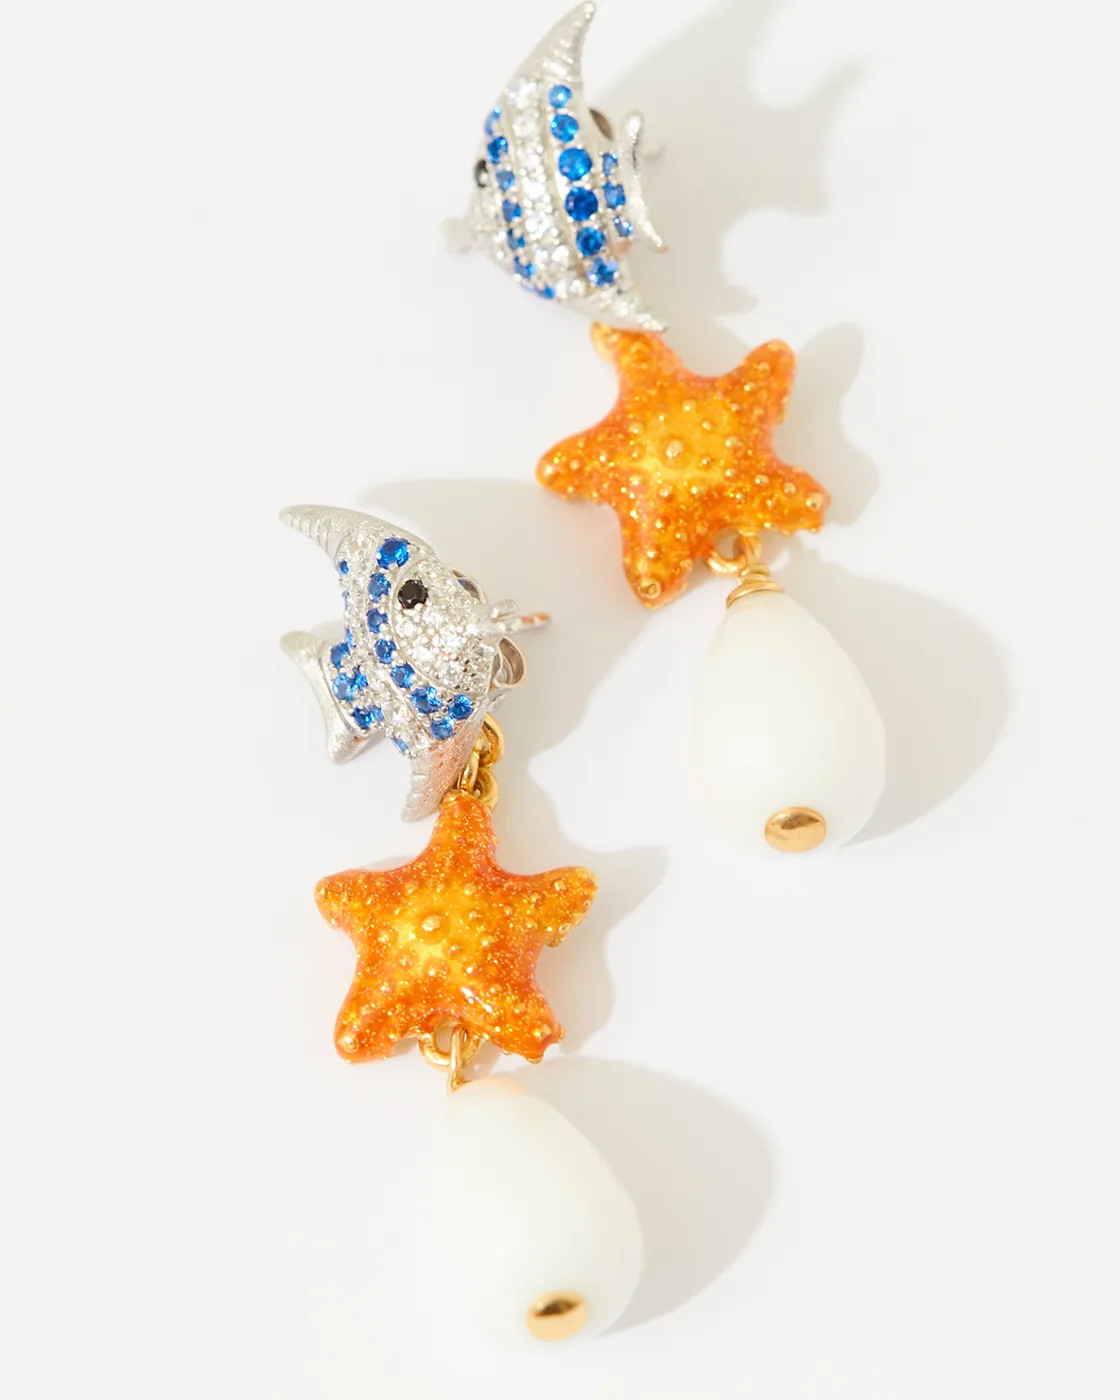 Isla De Mujeres Fish and Starfish Earrings with Agate